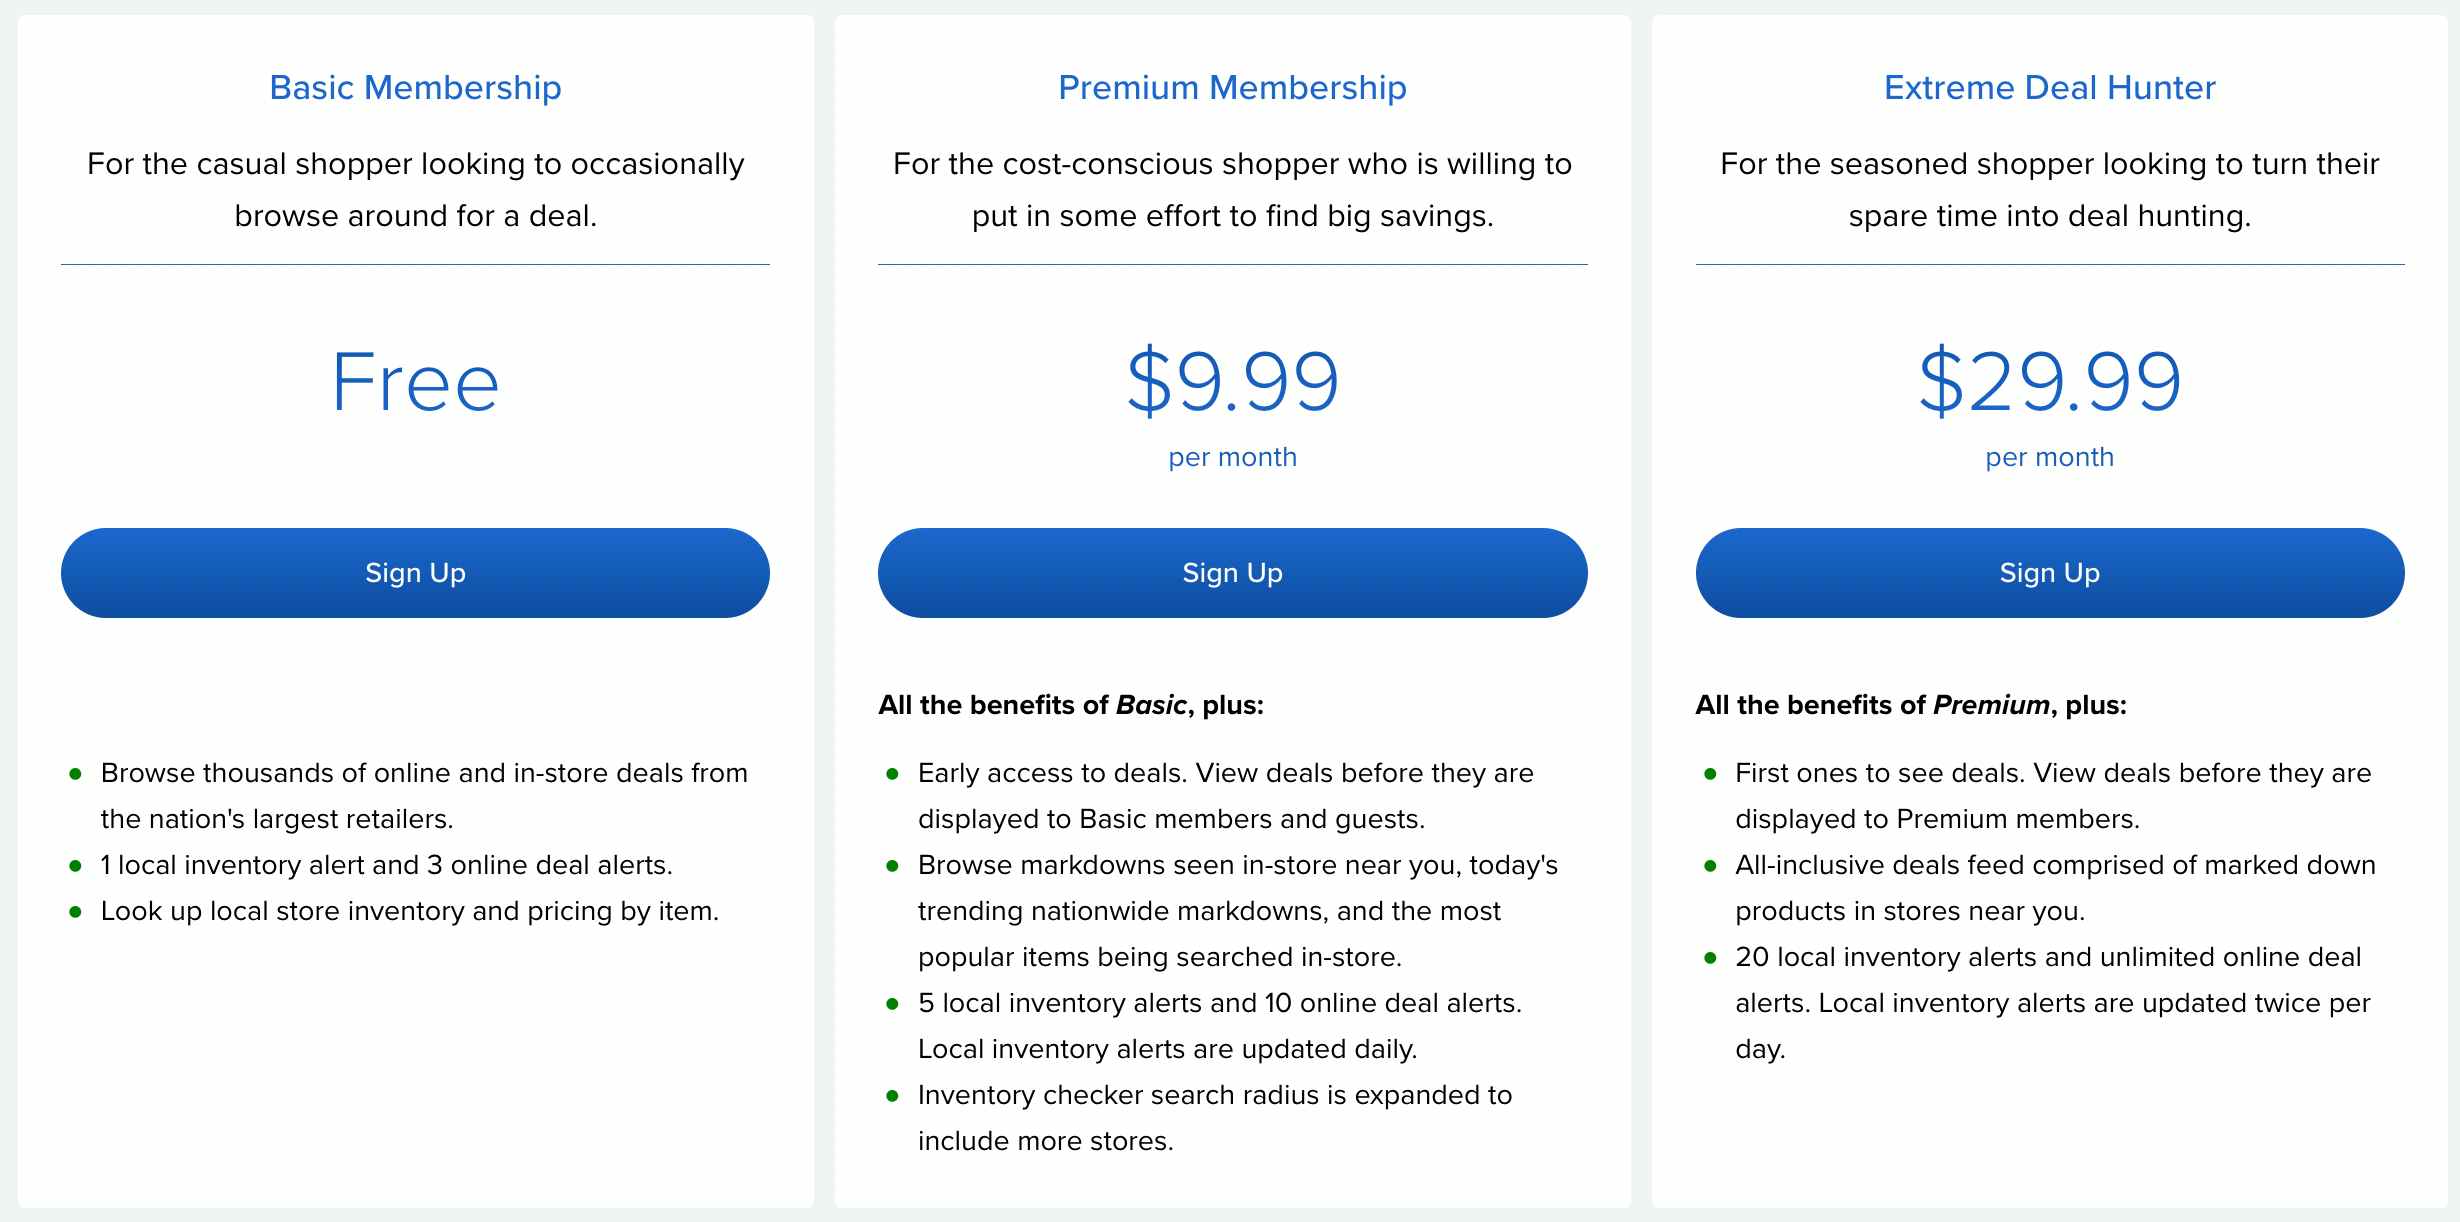 A screenshot of the membership pricing for BrickSeek, showing the Free, premium, and extreme deal hunter levels.